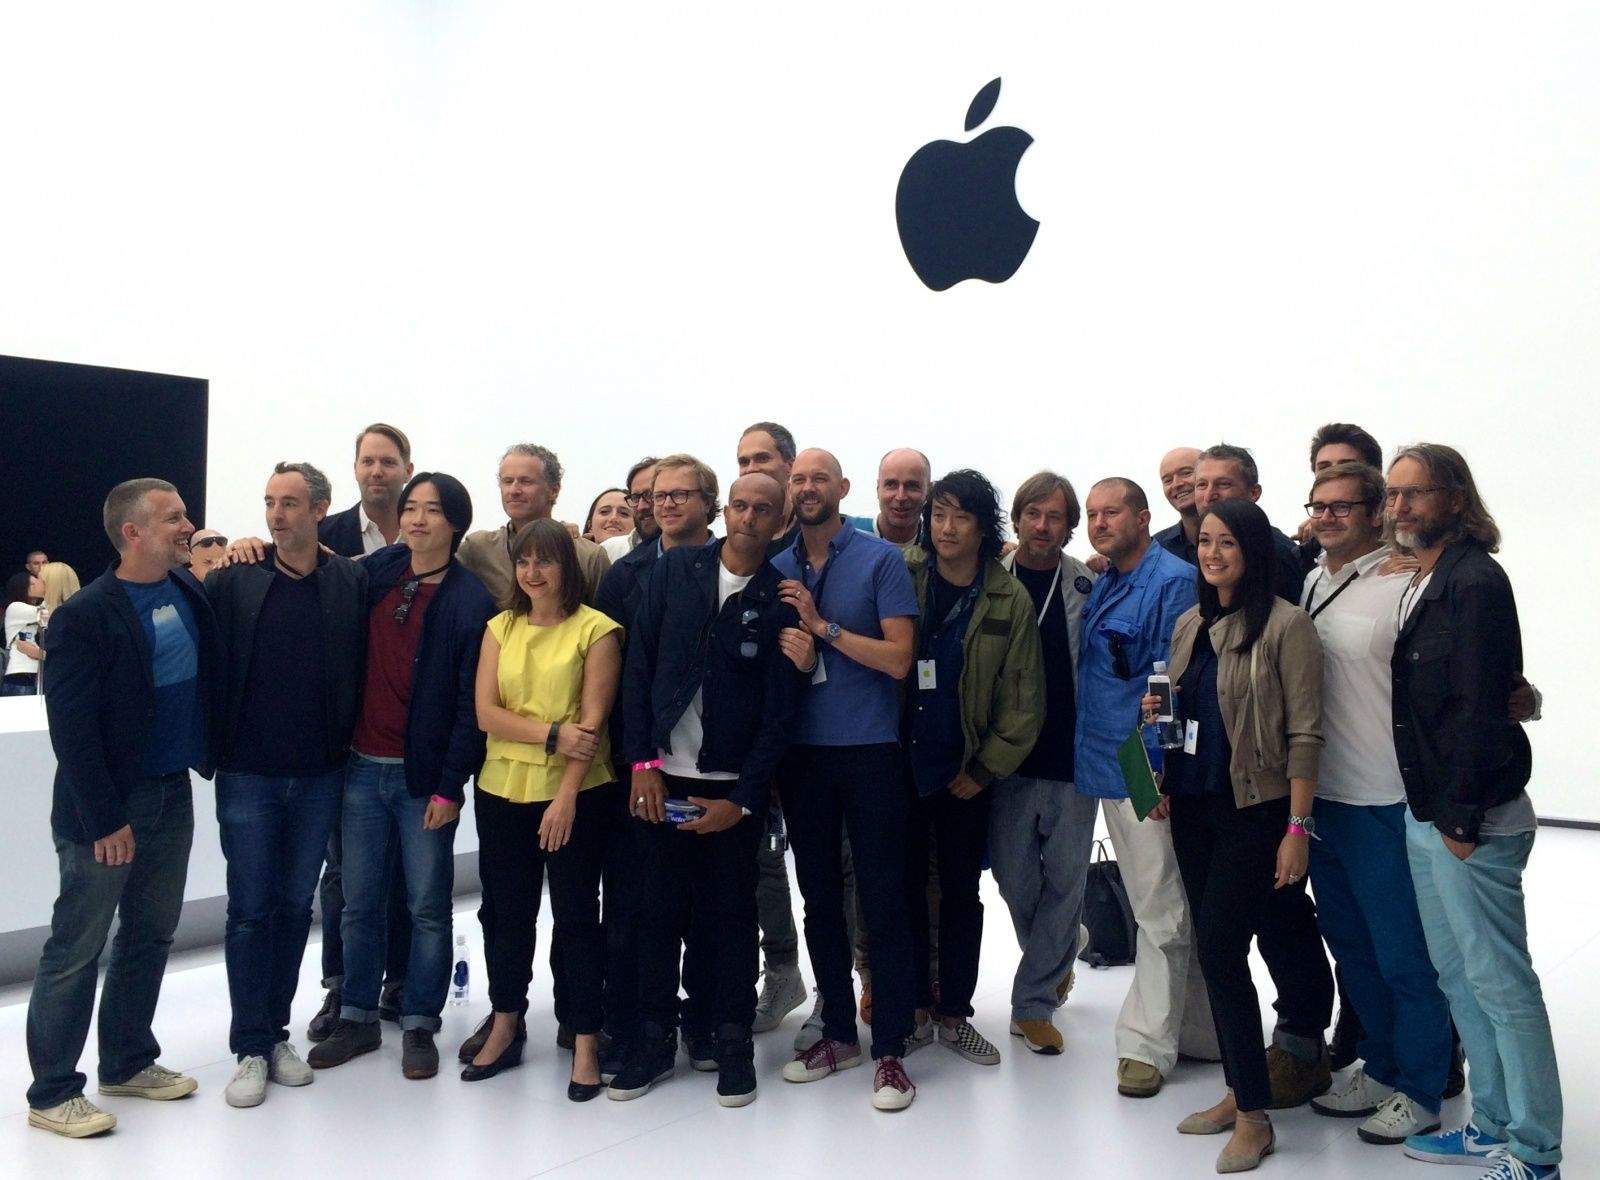 Apple's Industrial Design team at the Apple Watch unveiling.